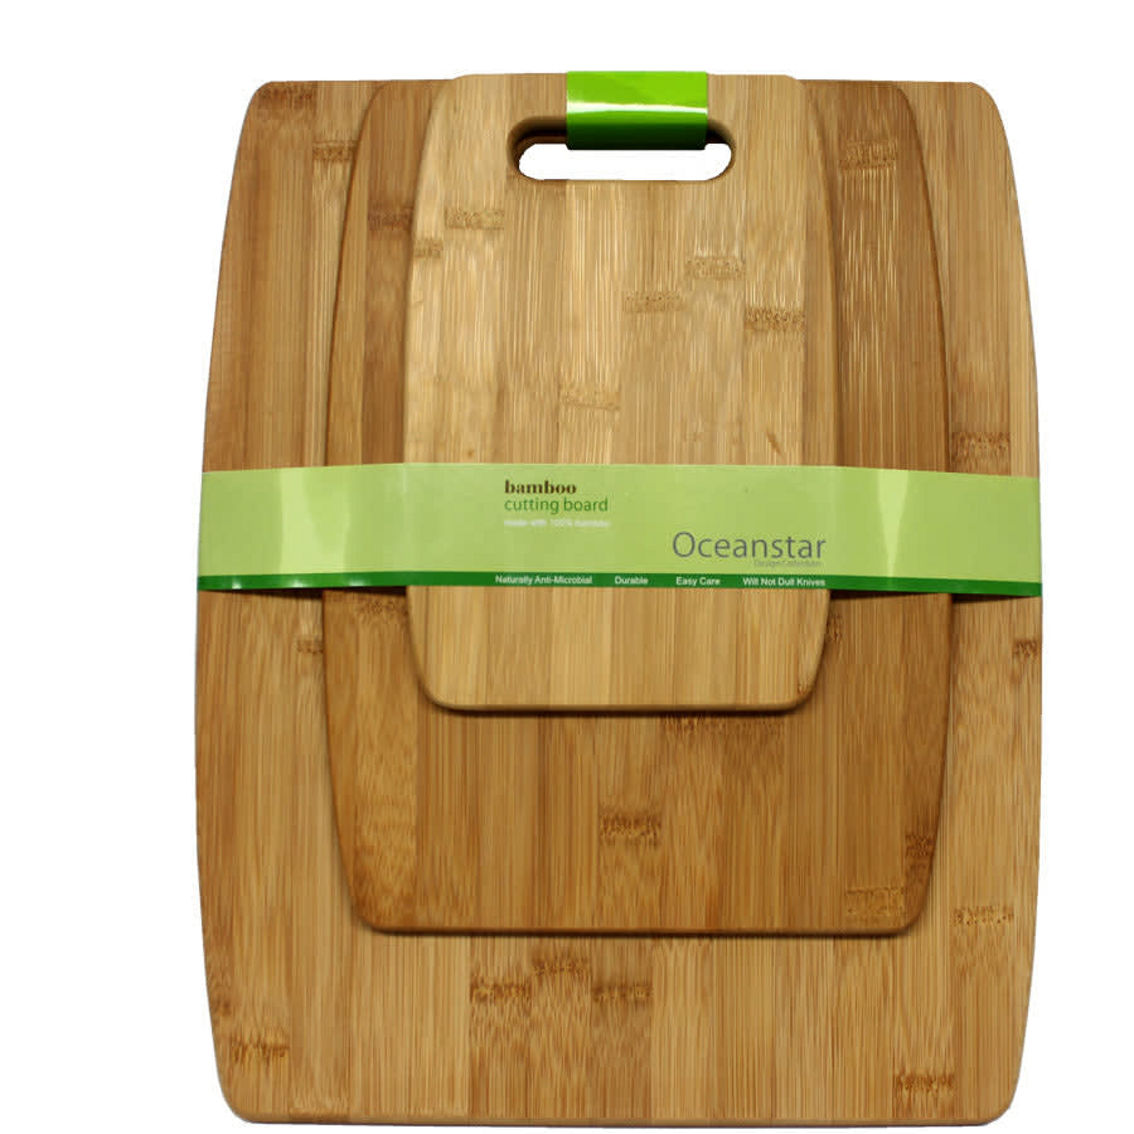 Oceanstar 3-Piece Bamboo Cutting Board Set - Image 2 of 4